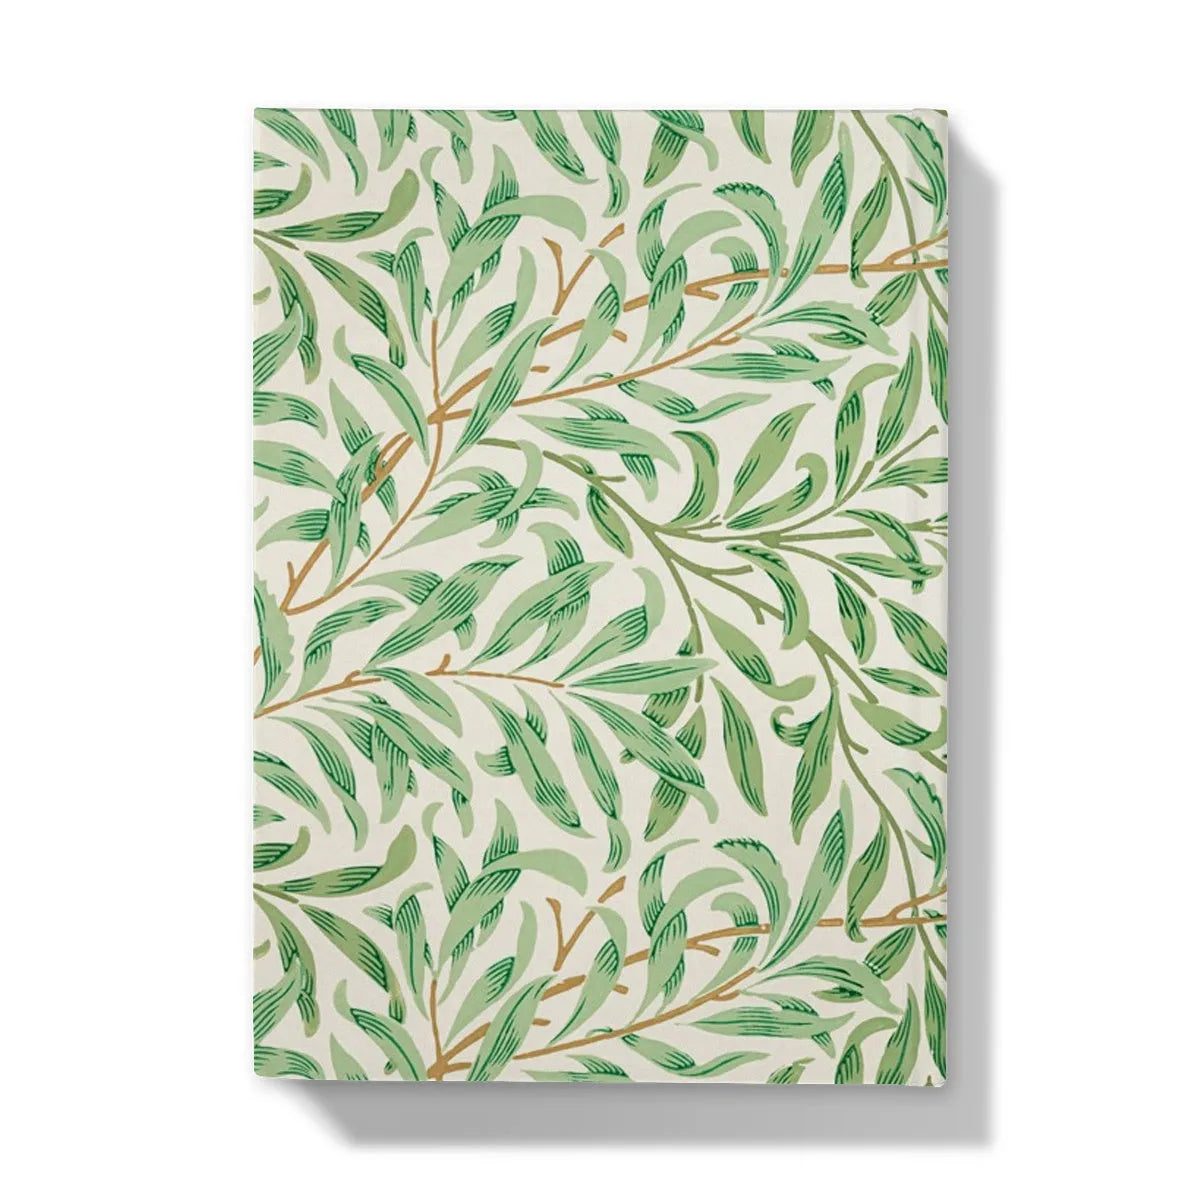 Willow Bough By William Morris Hardback Journal - Notebooks & Notepads - Aesthetic Art